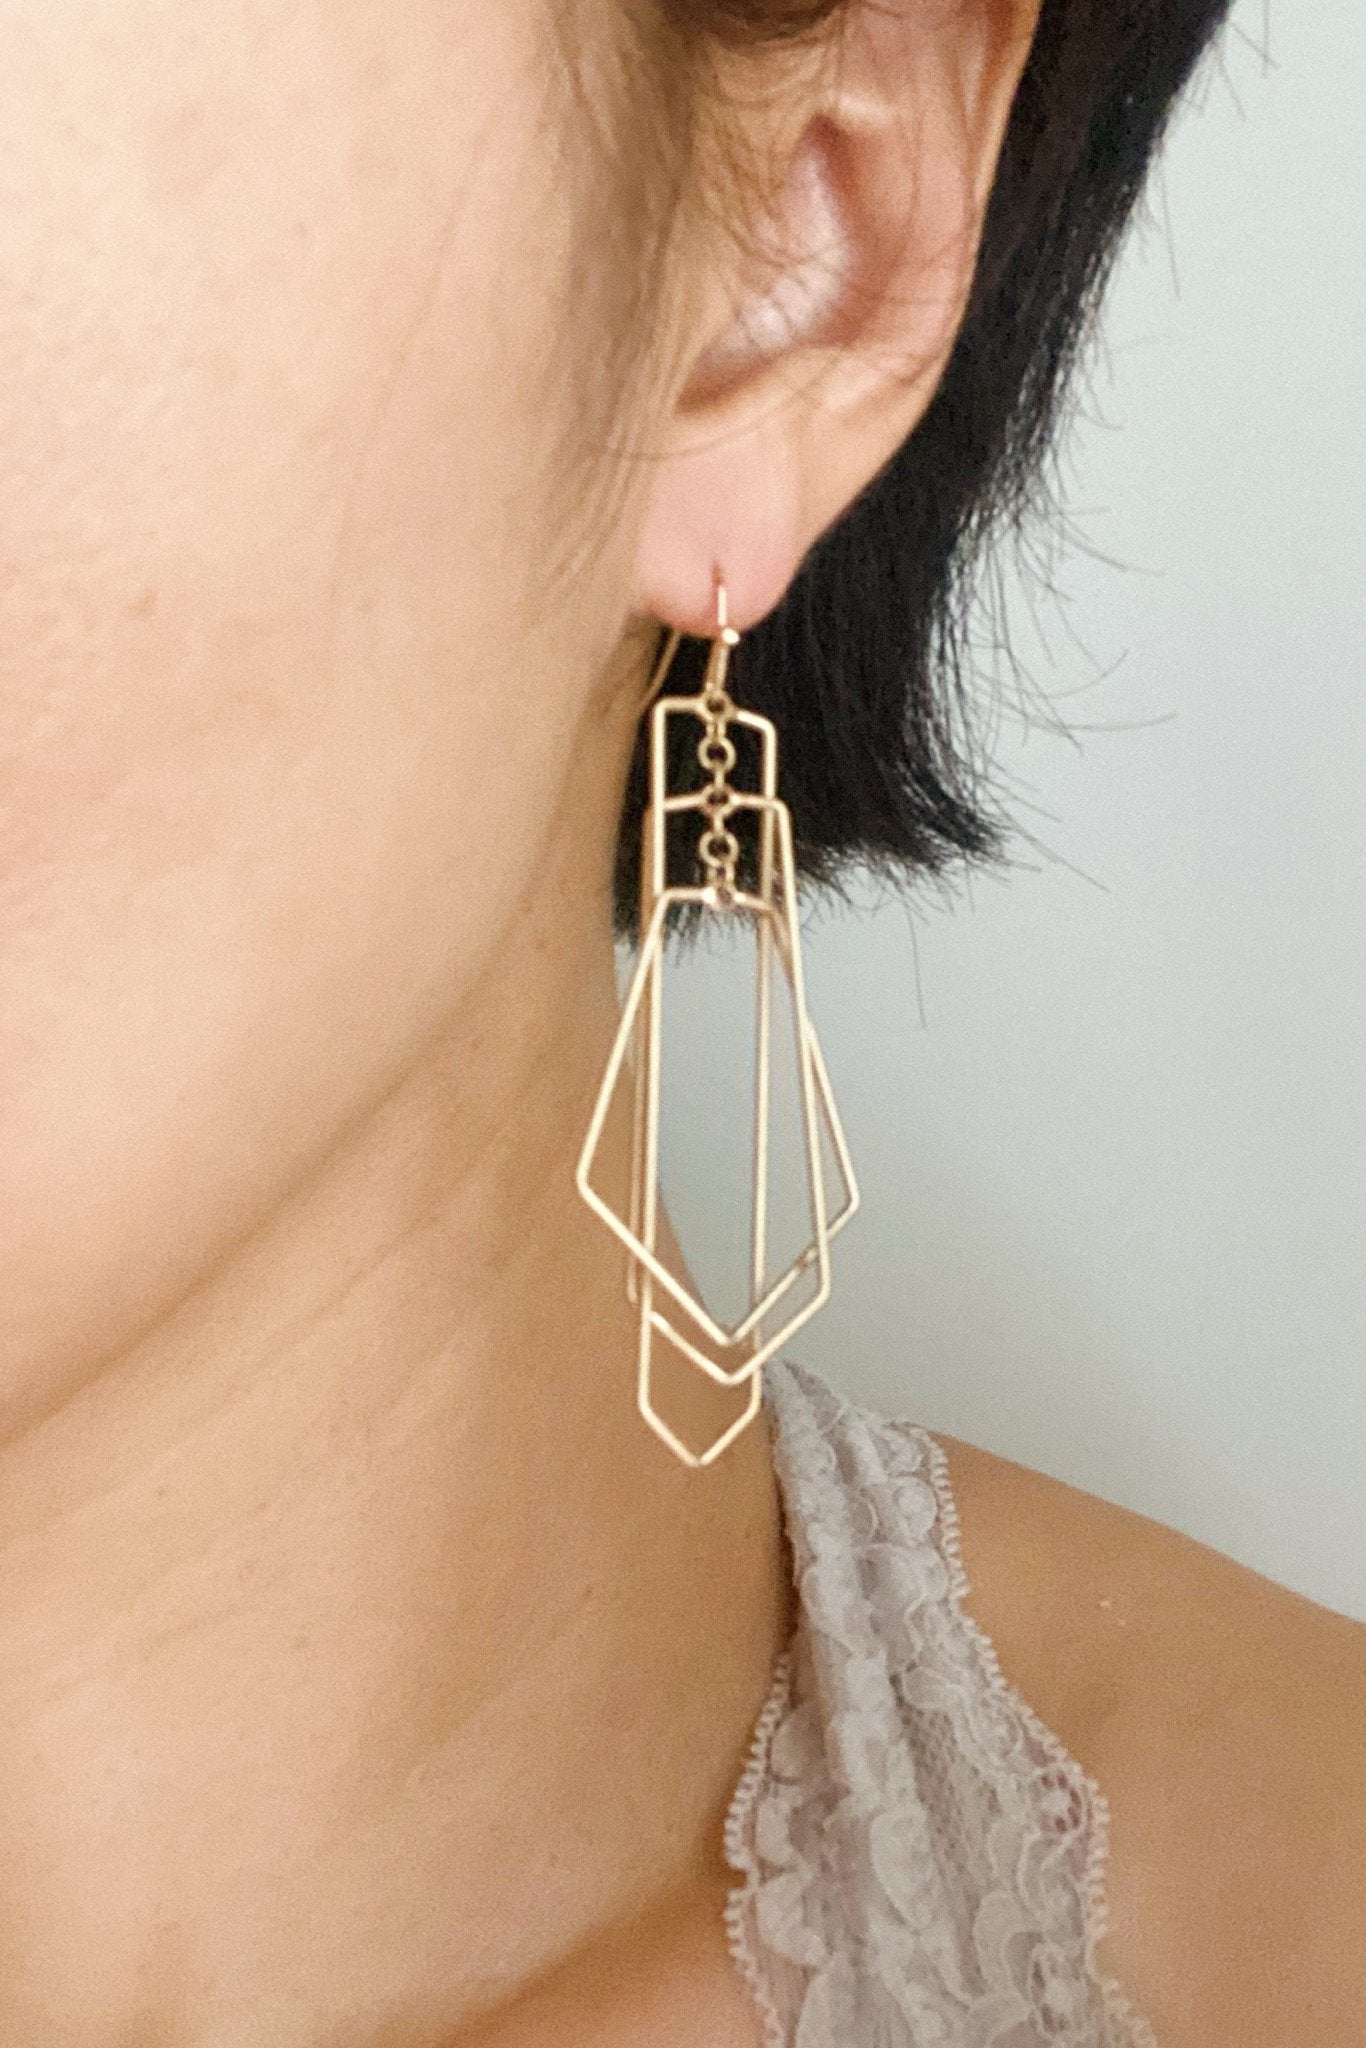 Shapes Overlay Earrings - The Kindness Cause